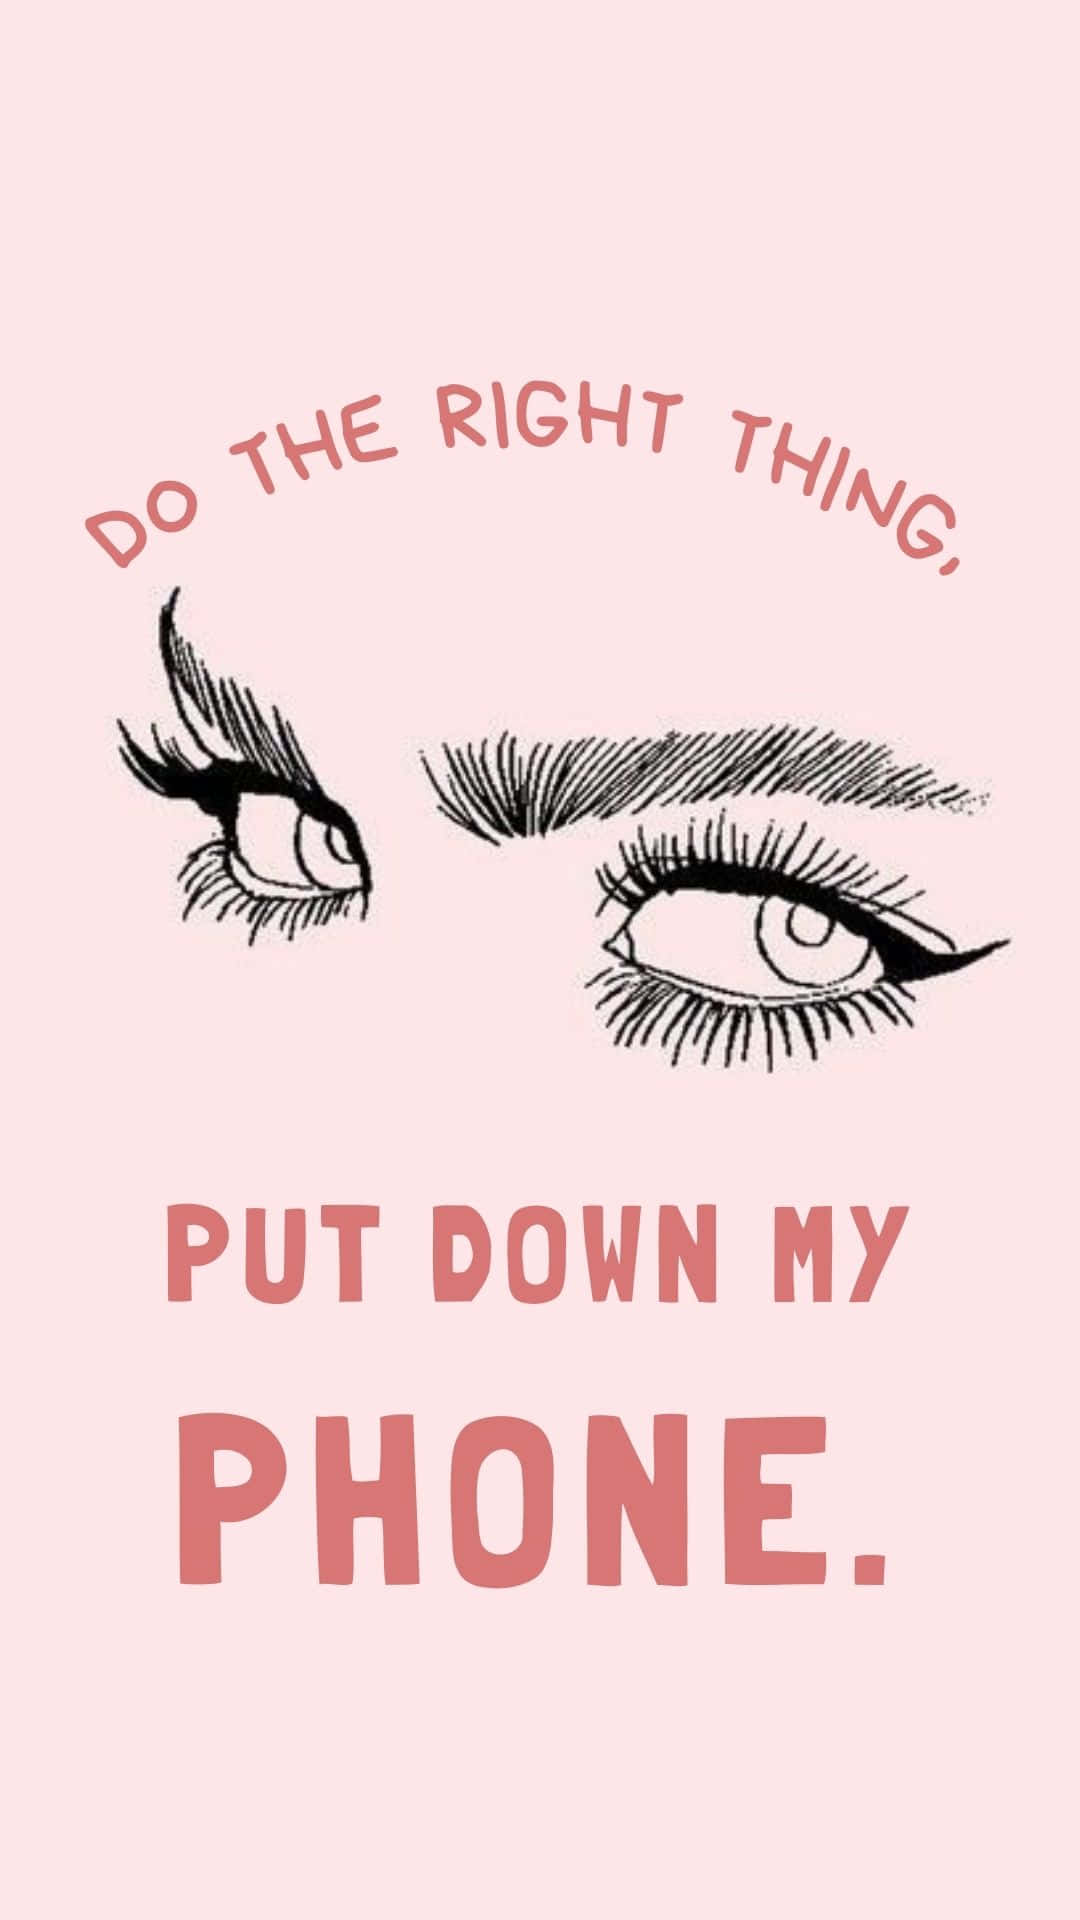 Put Phone Down wallpaper by Revennant  Download on ZEDGE  3694